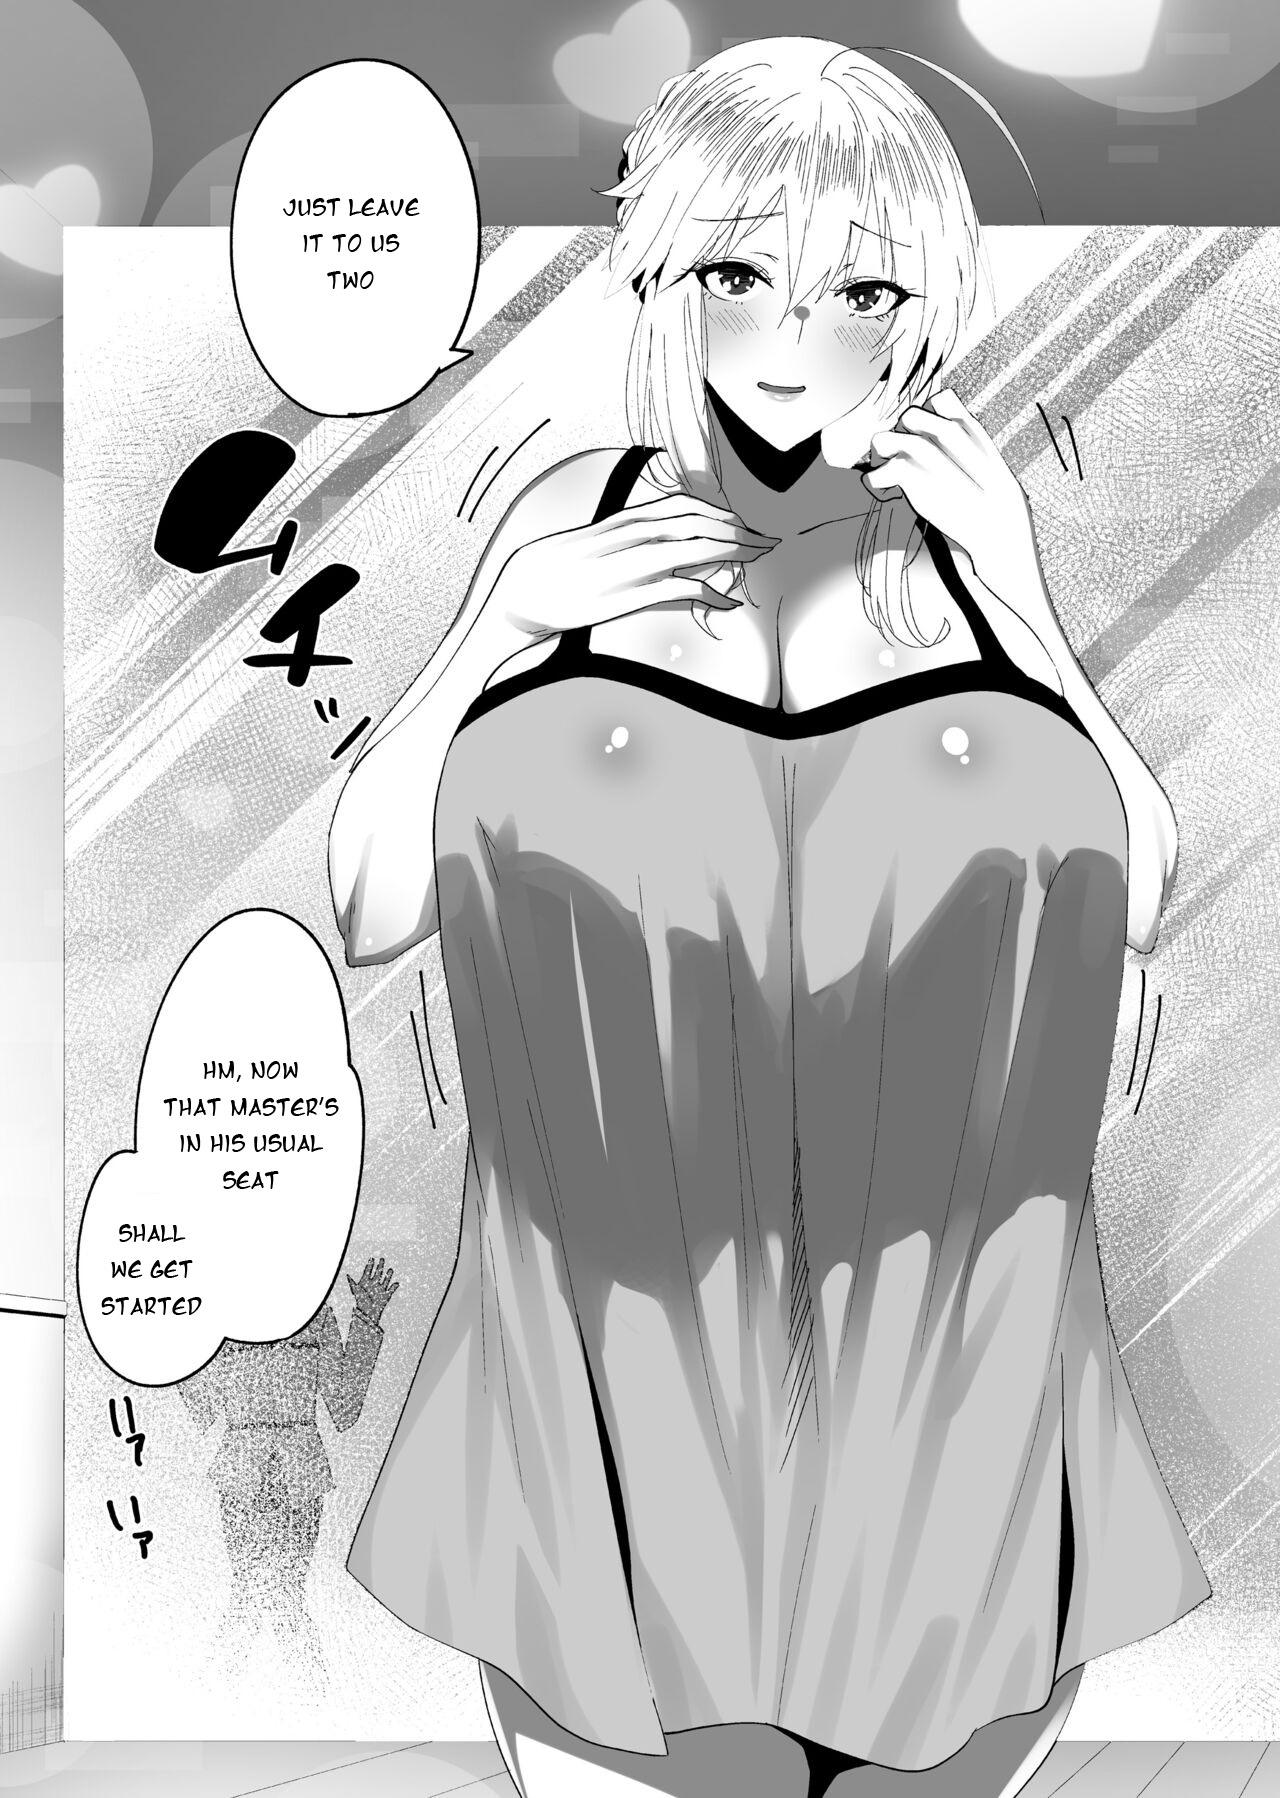 Blow Job Kabe no Mukou de Kimi ga Naku 3 | On the other side of the wall, you're crying 3 - Fate grand order Reverse Cowgirl - Page 6